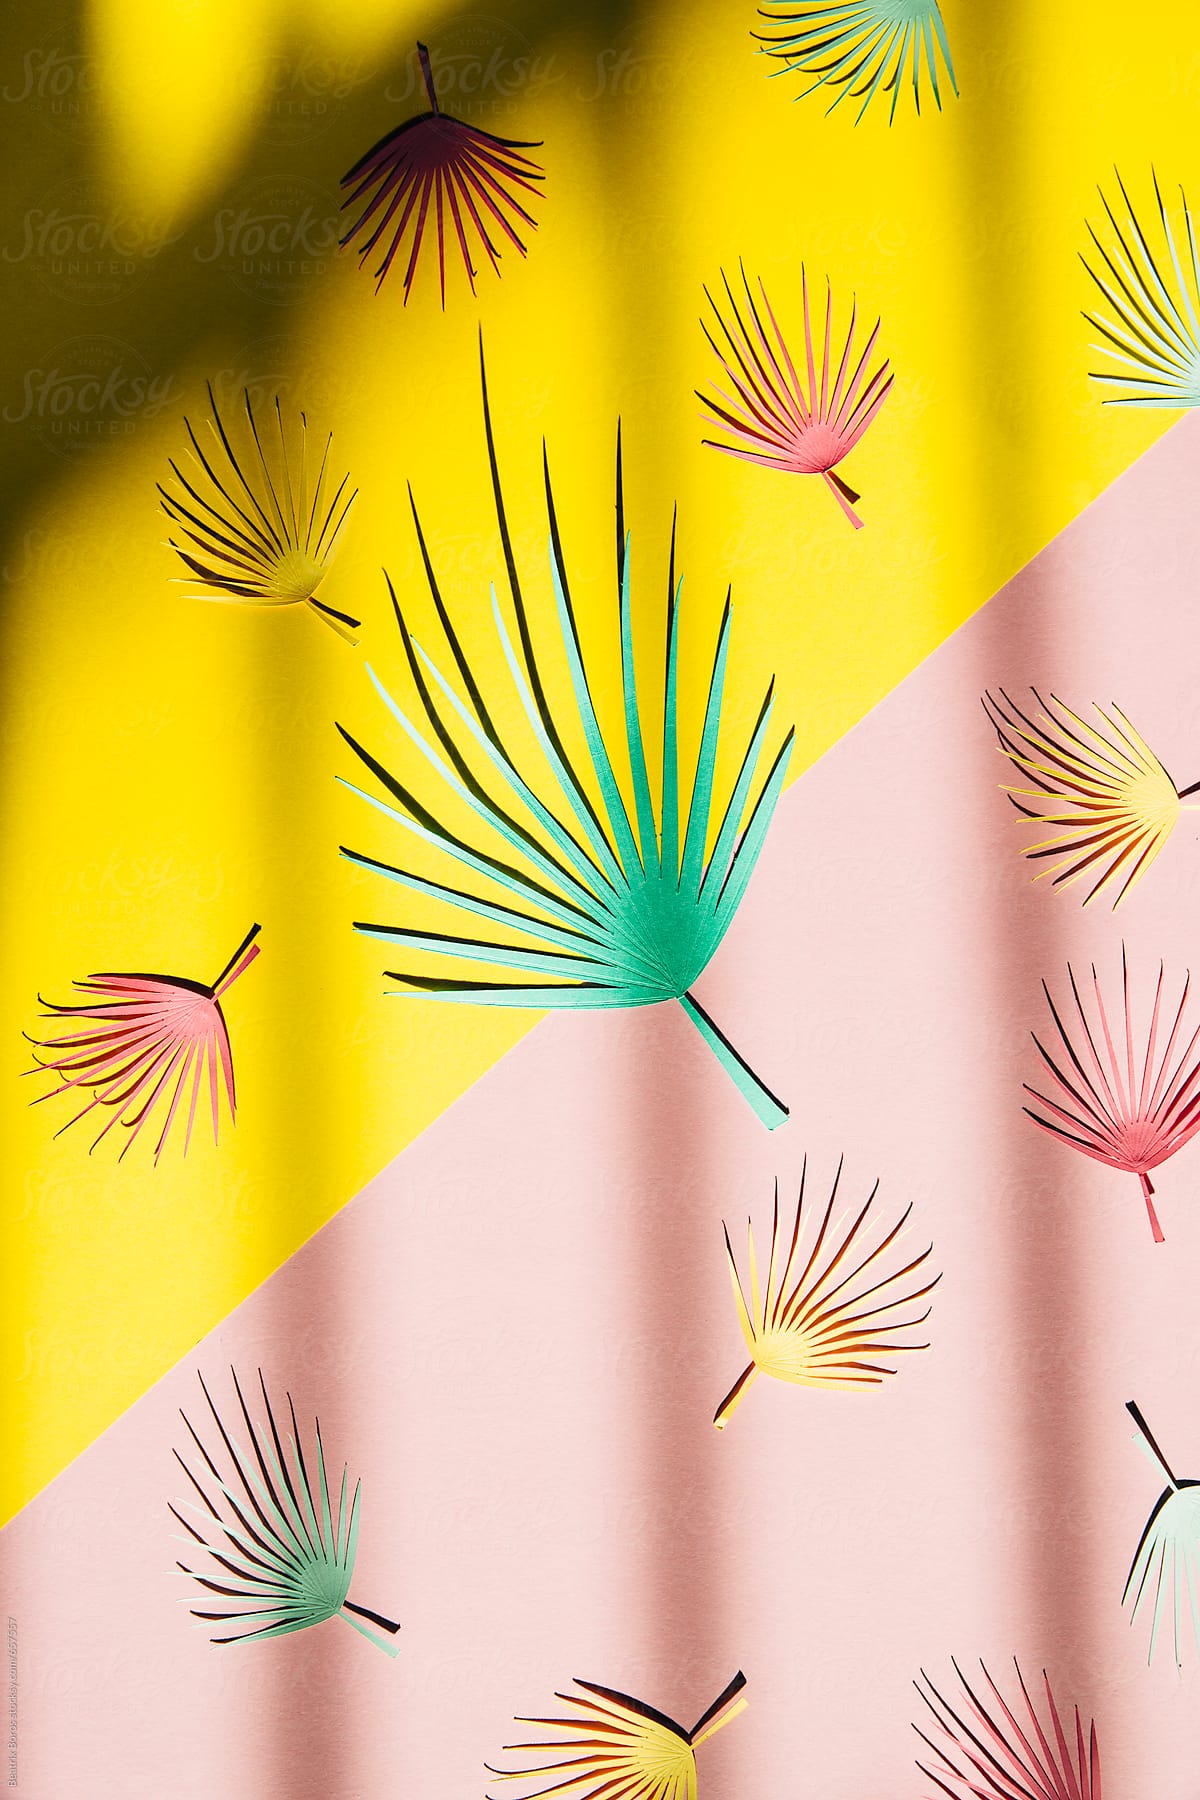 Palm leaf pattern on a pink and yellow diagonal background with shadow